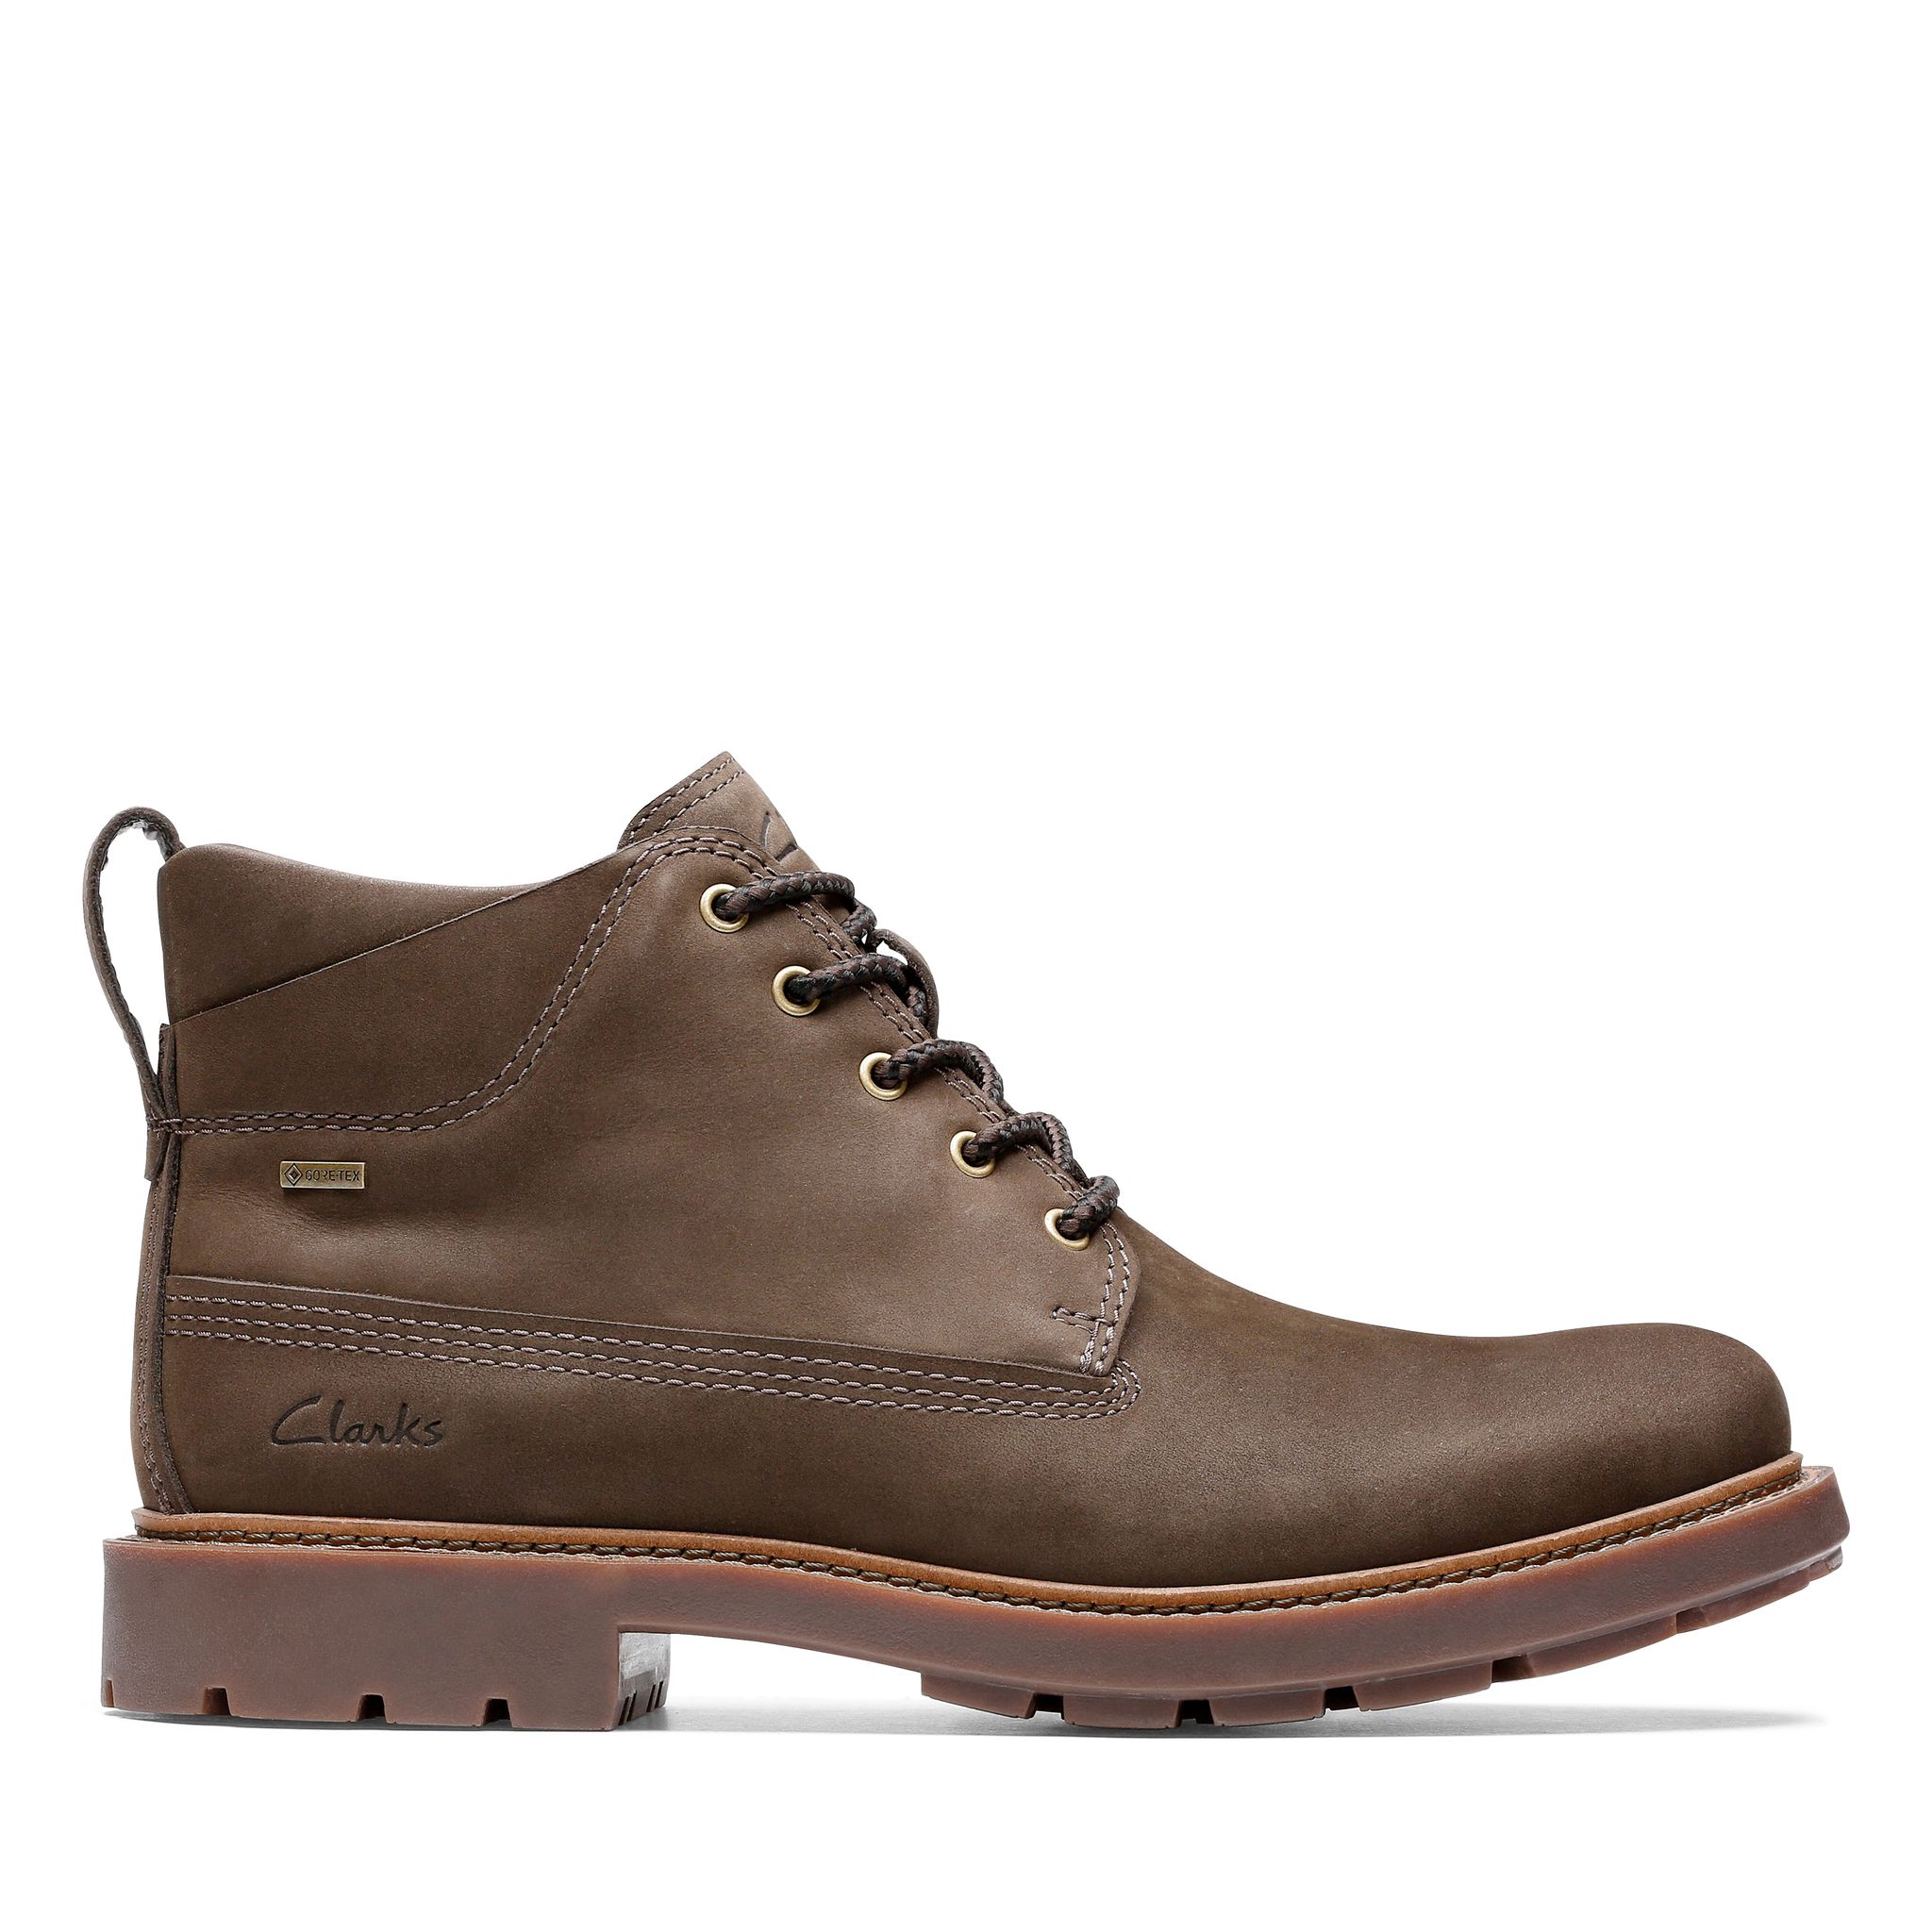 Clarks Craftdale 2 Mgtx - Brown Nubuck leather